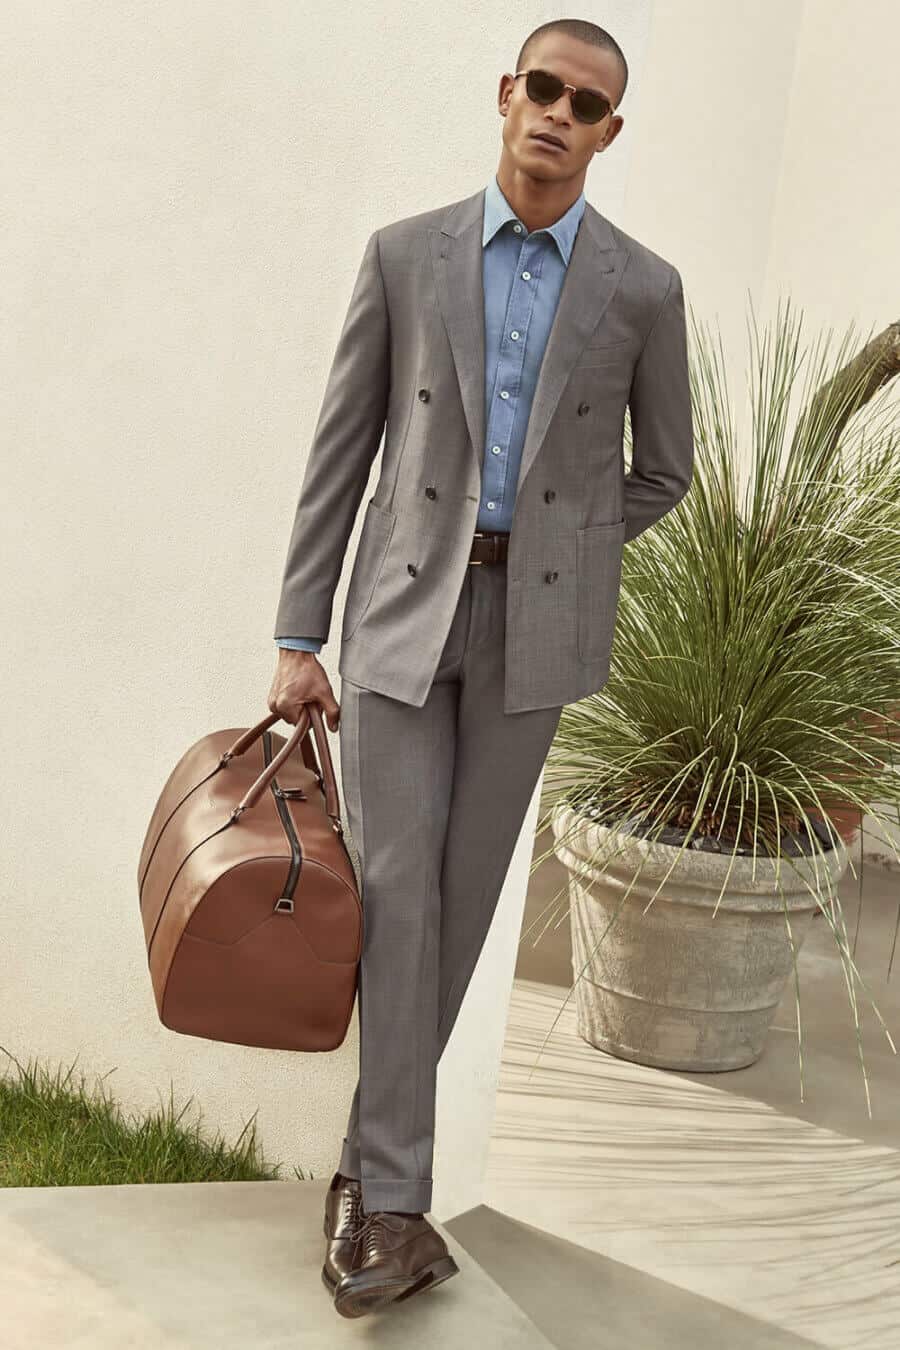 Men's mid grey suit worn with brown leather shoes